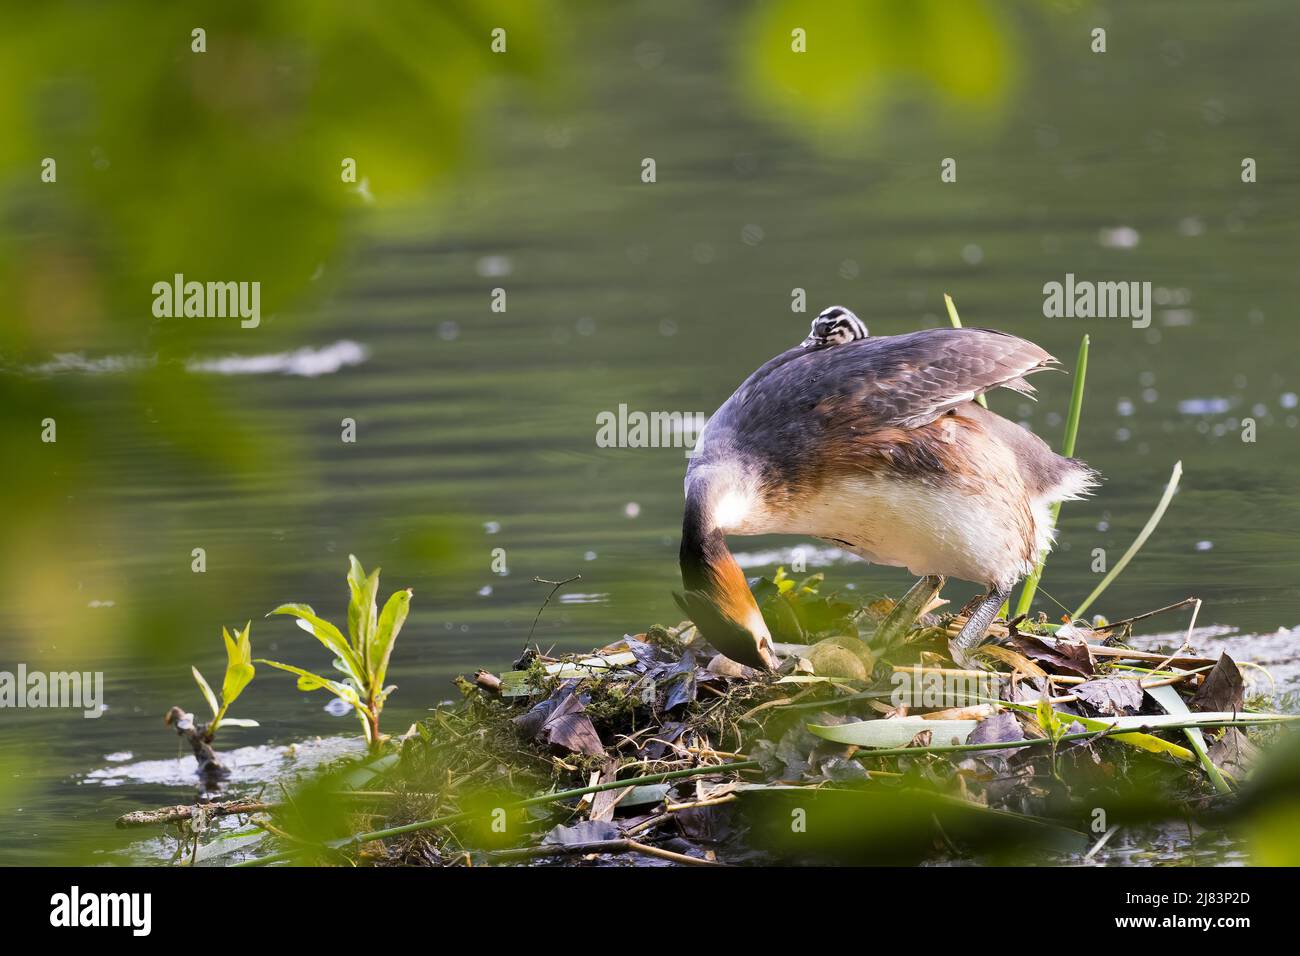 Great crested grebe (Podiceps cristatus) on nest with young bird in plumage, turning eggs, Hesse, Germany Stock Photo